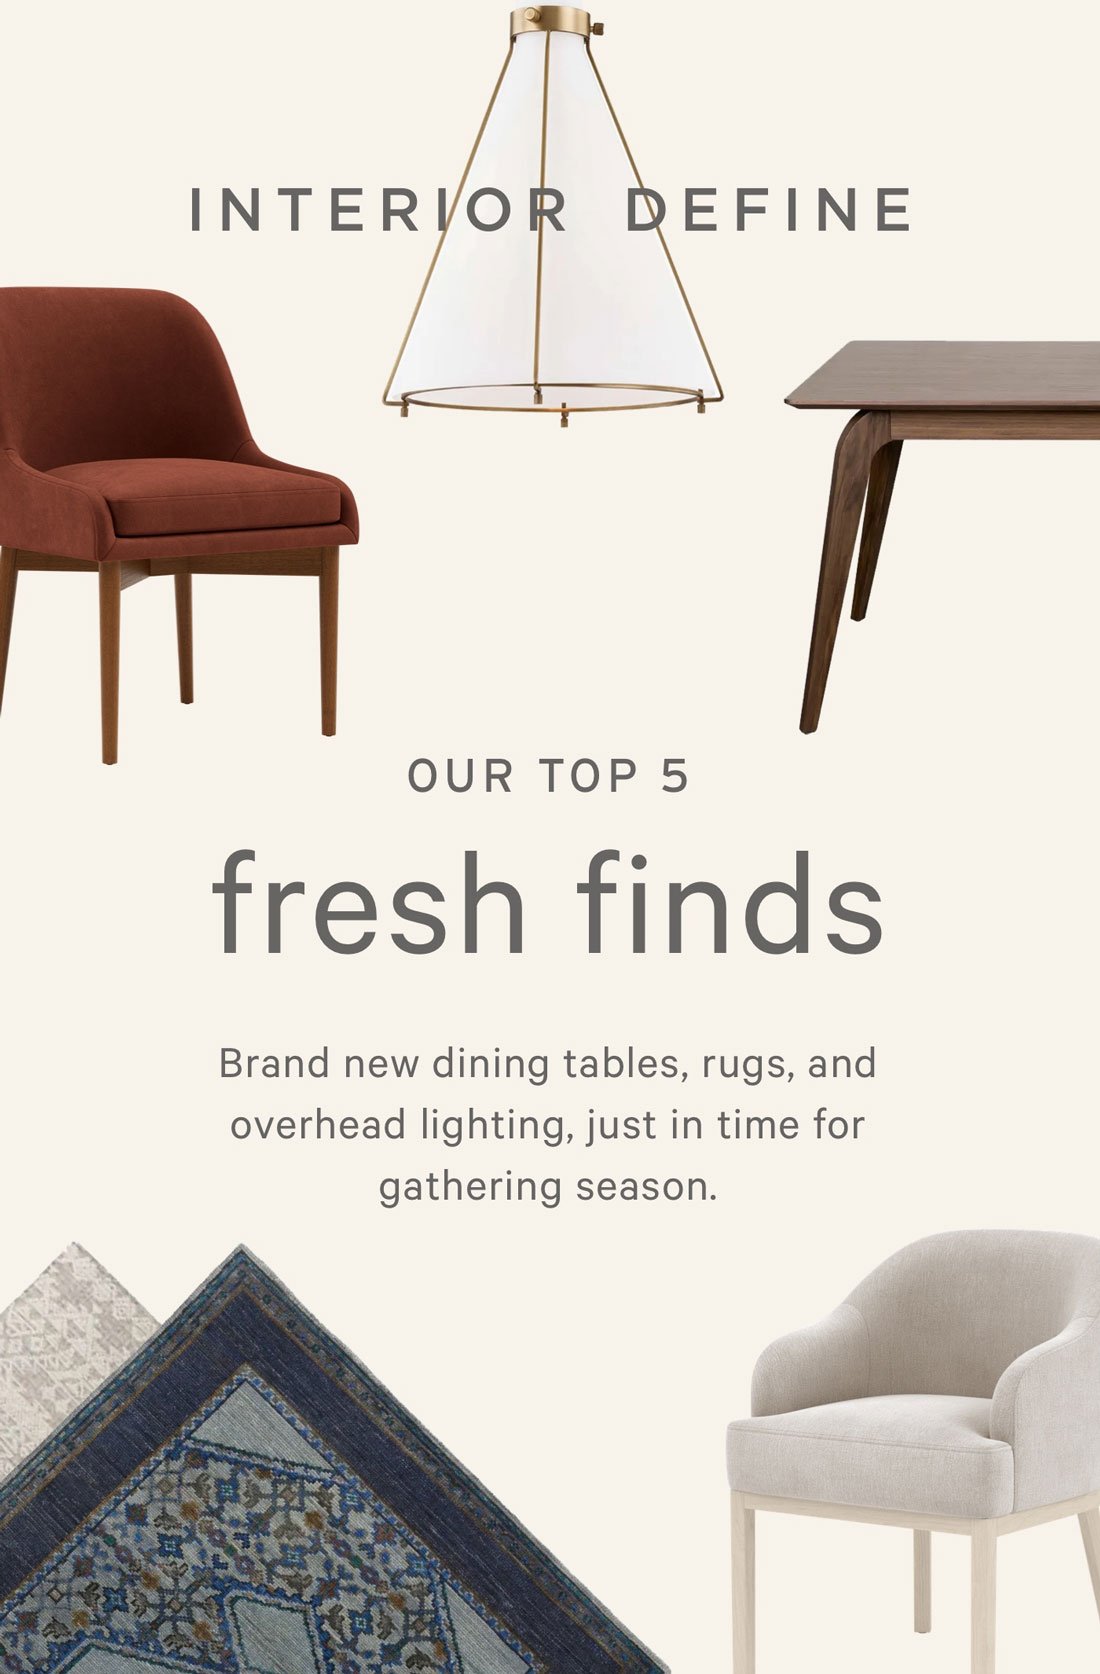 OUR TOP 5 freshest finds  Brand new dining tables, rugs, and overhead lighting, just in time for gathering season.